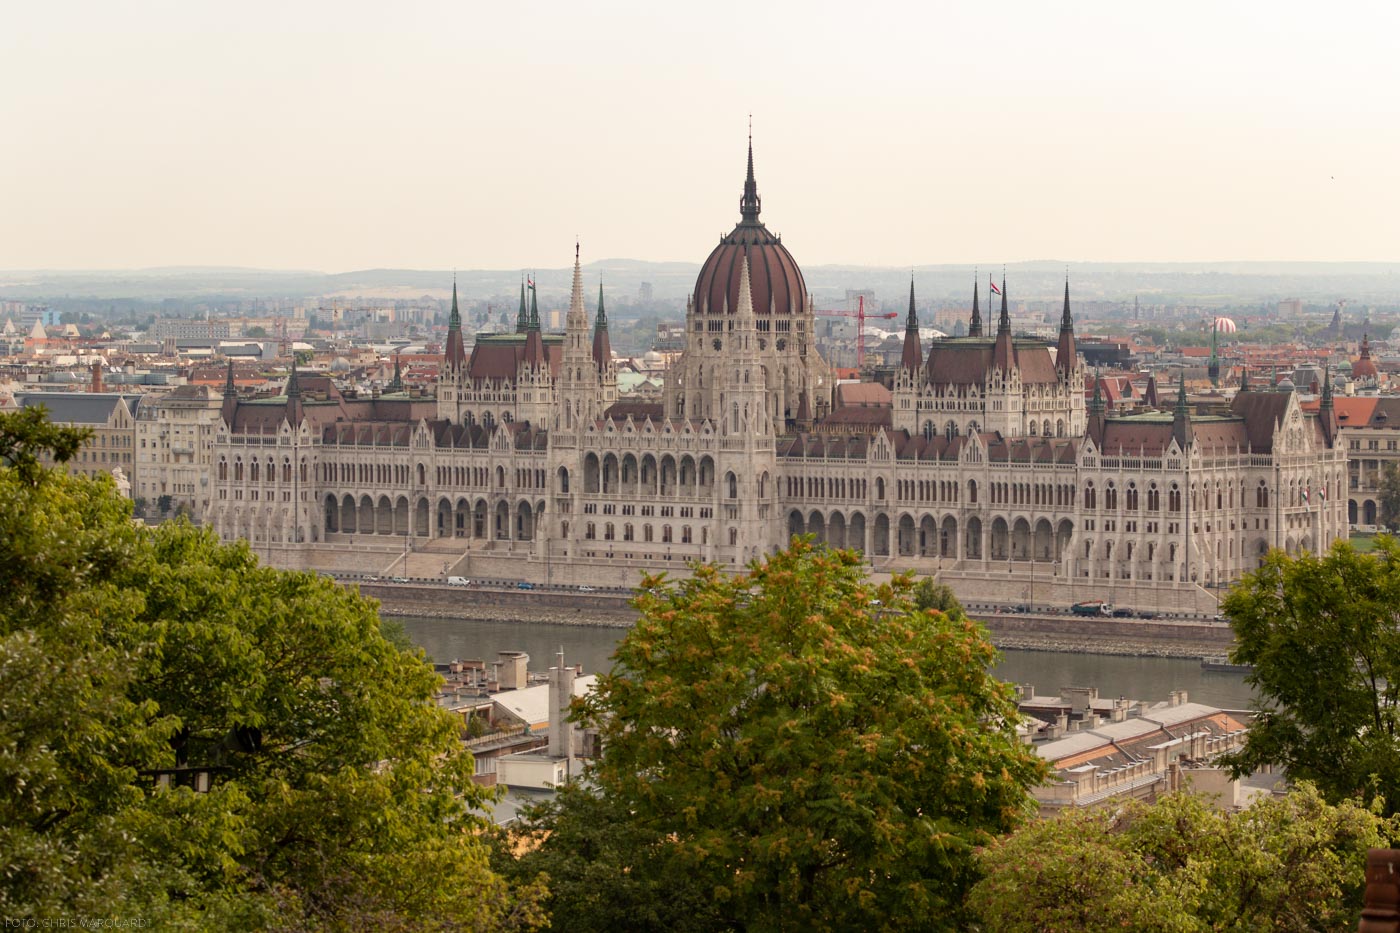 A photo of the Budapest parliament building.